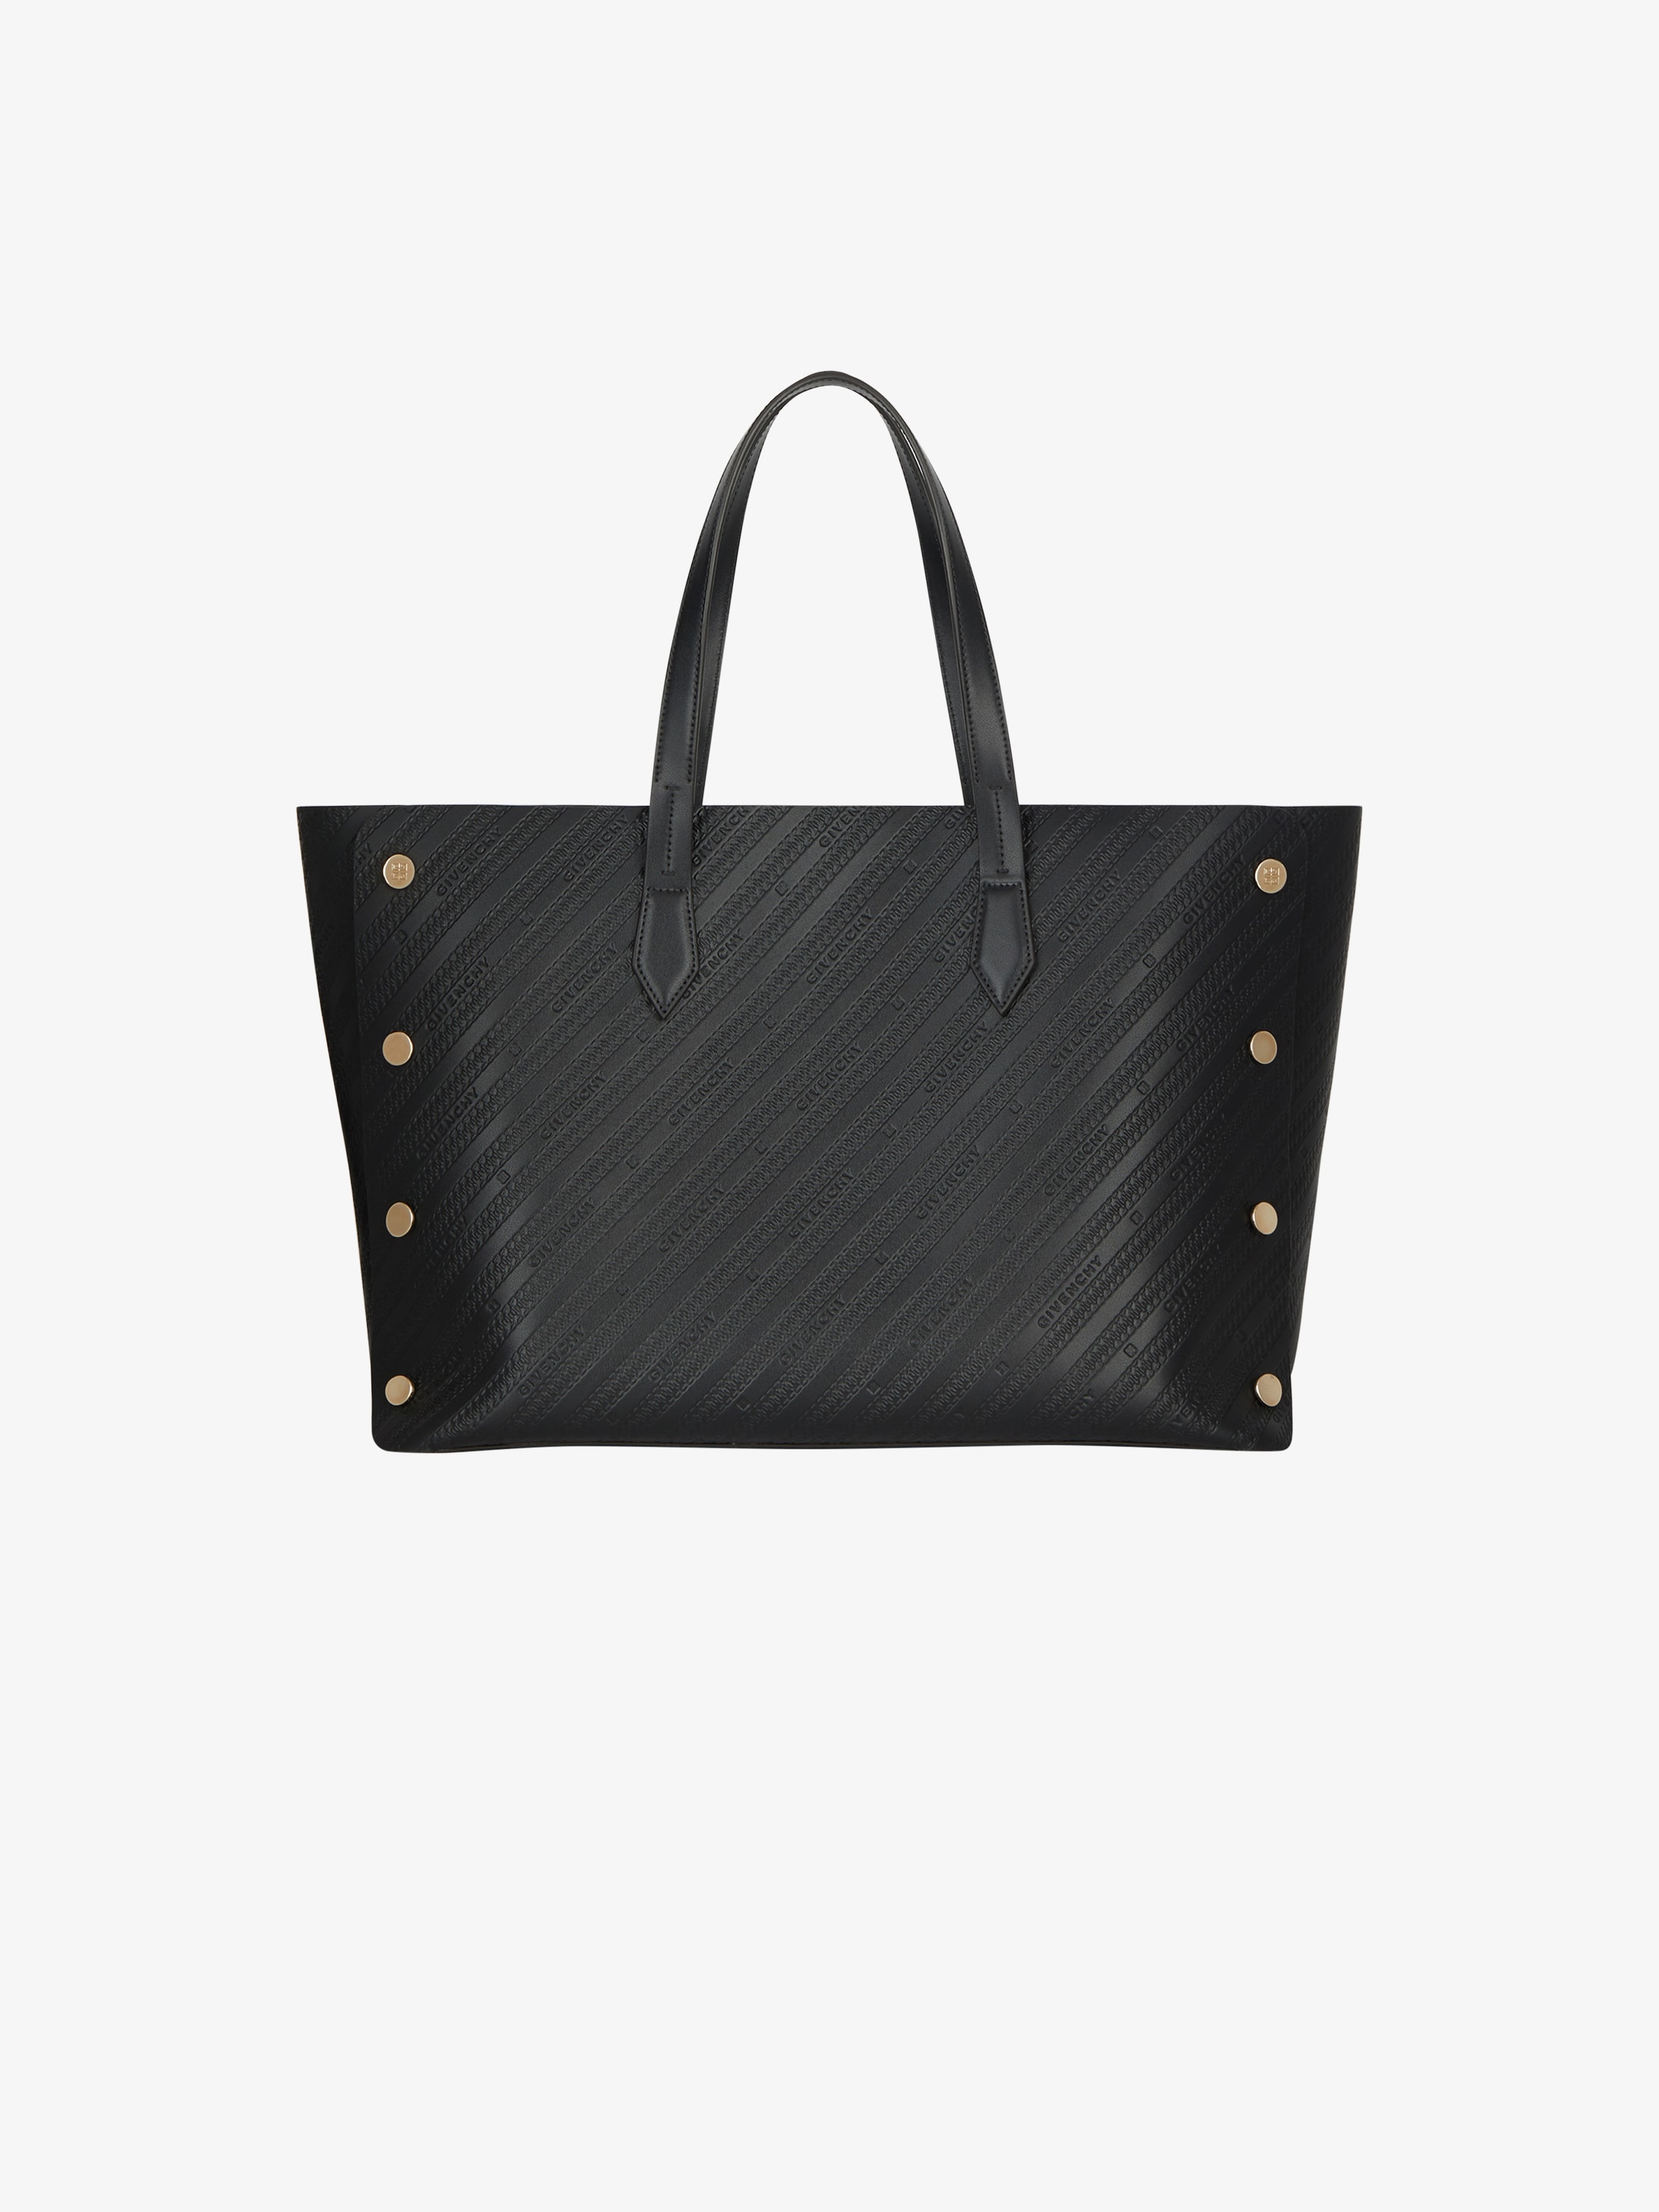 Medium Bond shopper in GIVENCHY chain embossed leather | GIVENCHY Paris